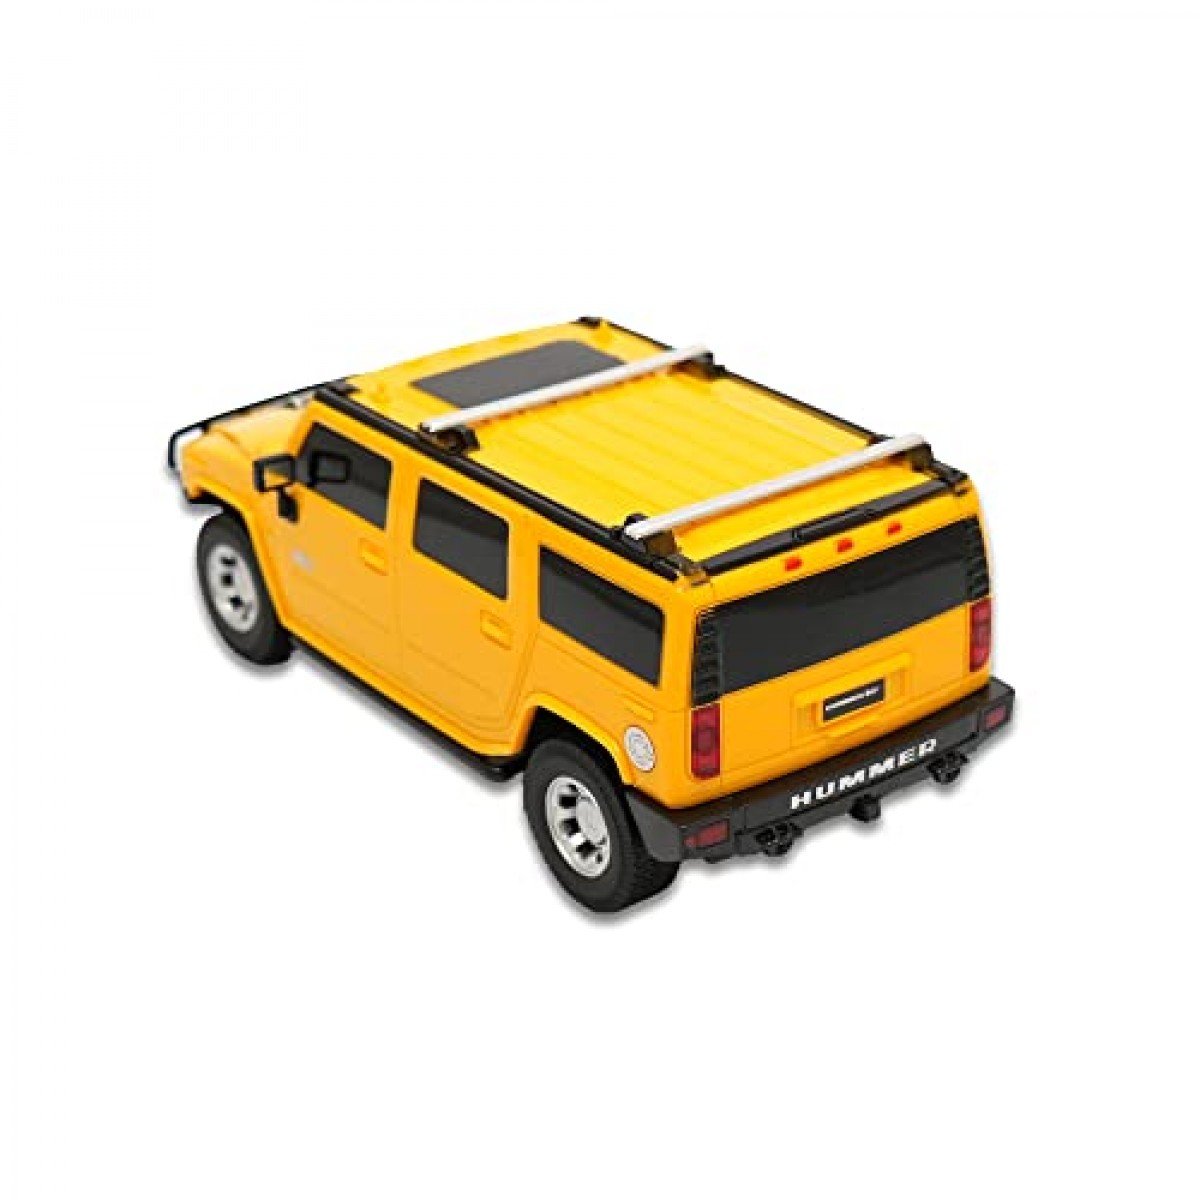 Road Burner Rechargable Remote Control Car for Kids Hummer H2 Full Function, 1:24 Scale Pack of 1, Yellow, Age 6Y+